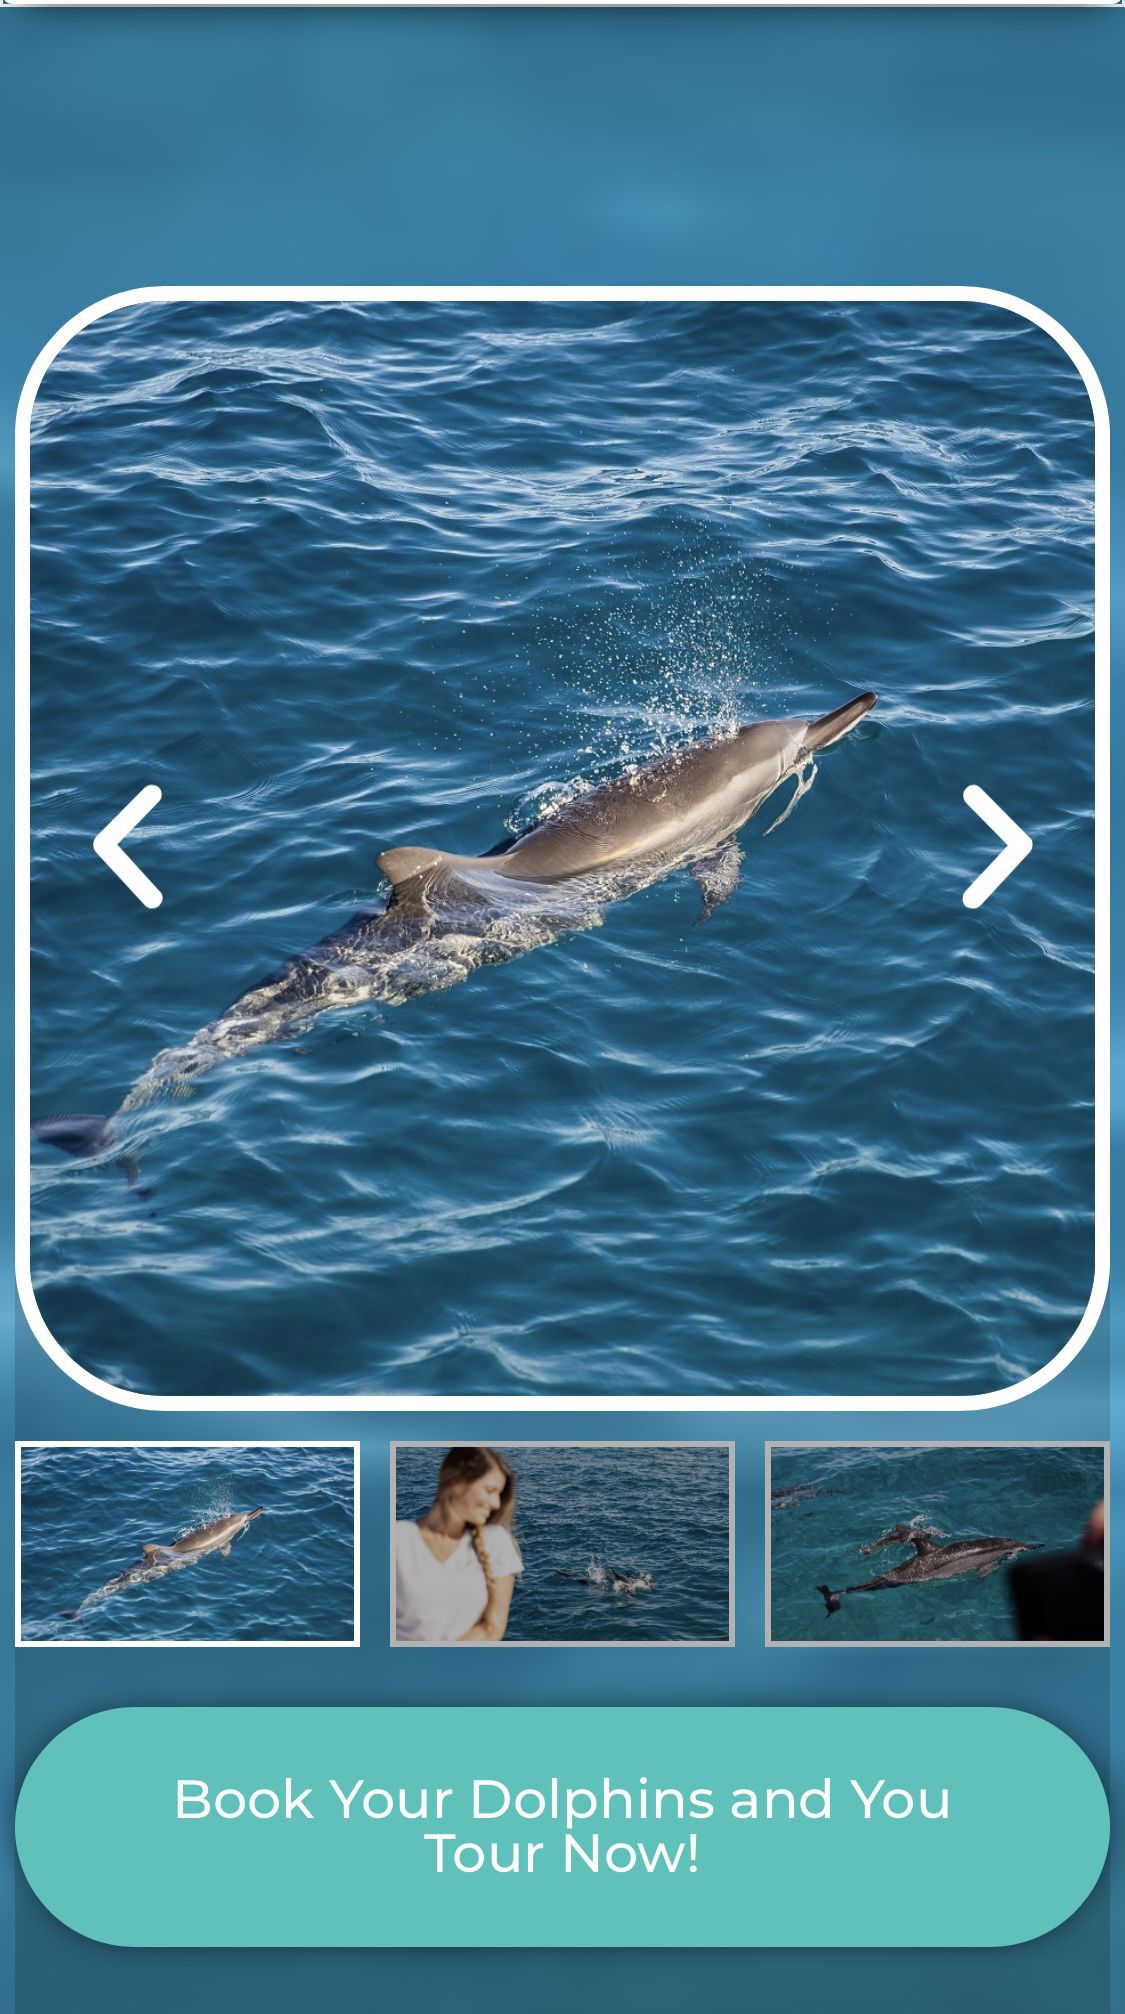 Two tickets to Dolphins and You adventure trip in Waianae, Hawaii for Labor day weekend 2023 - 22% off